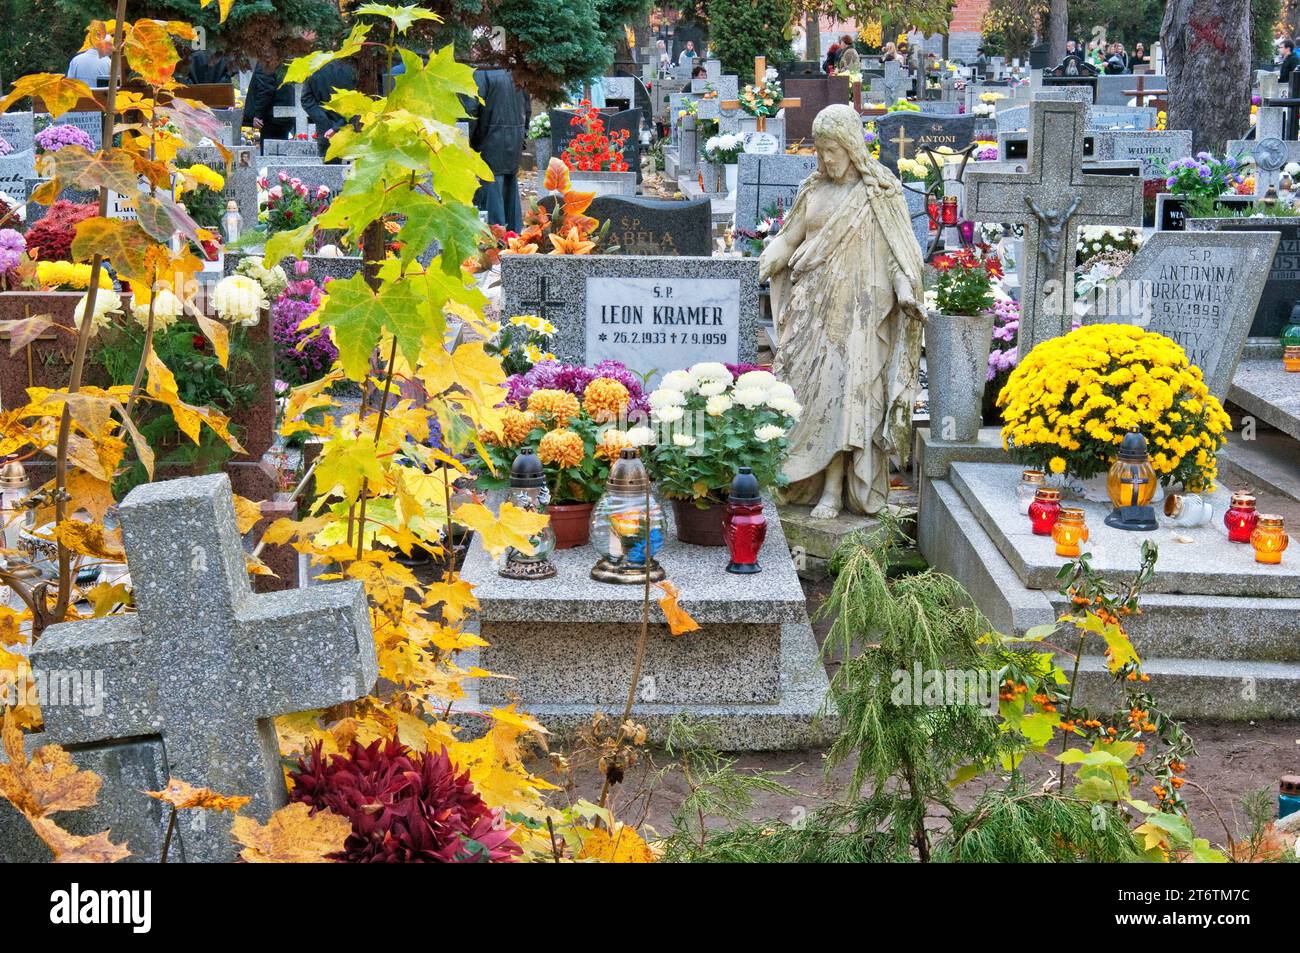 Chrysanthemum flowers and votive candles on graves on All Saints Day at Saint Lawrence Cemetery in Wroclaw, Lower Silesia, Poland Stock Photo